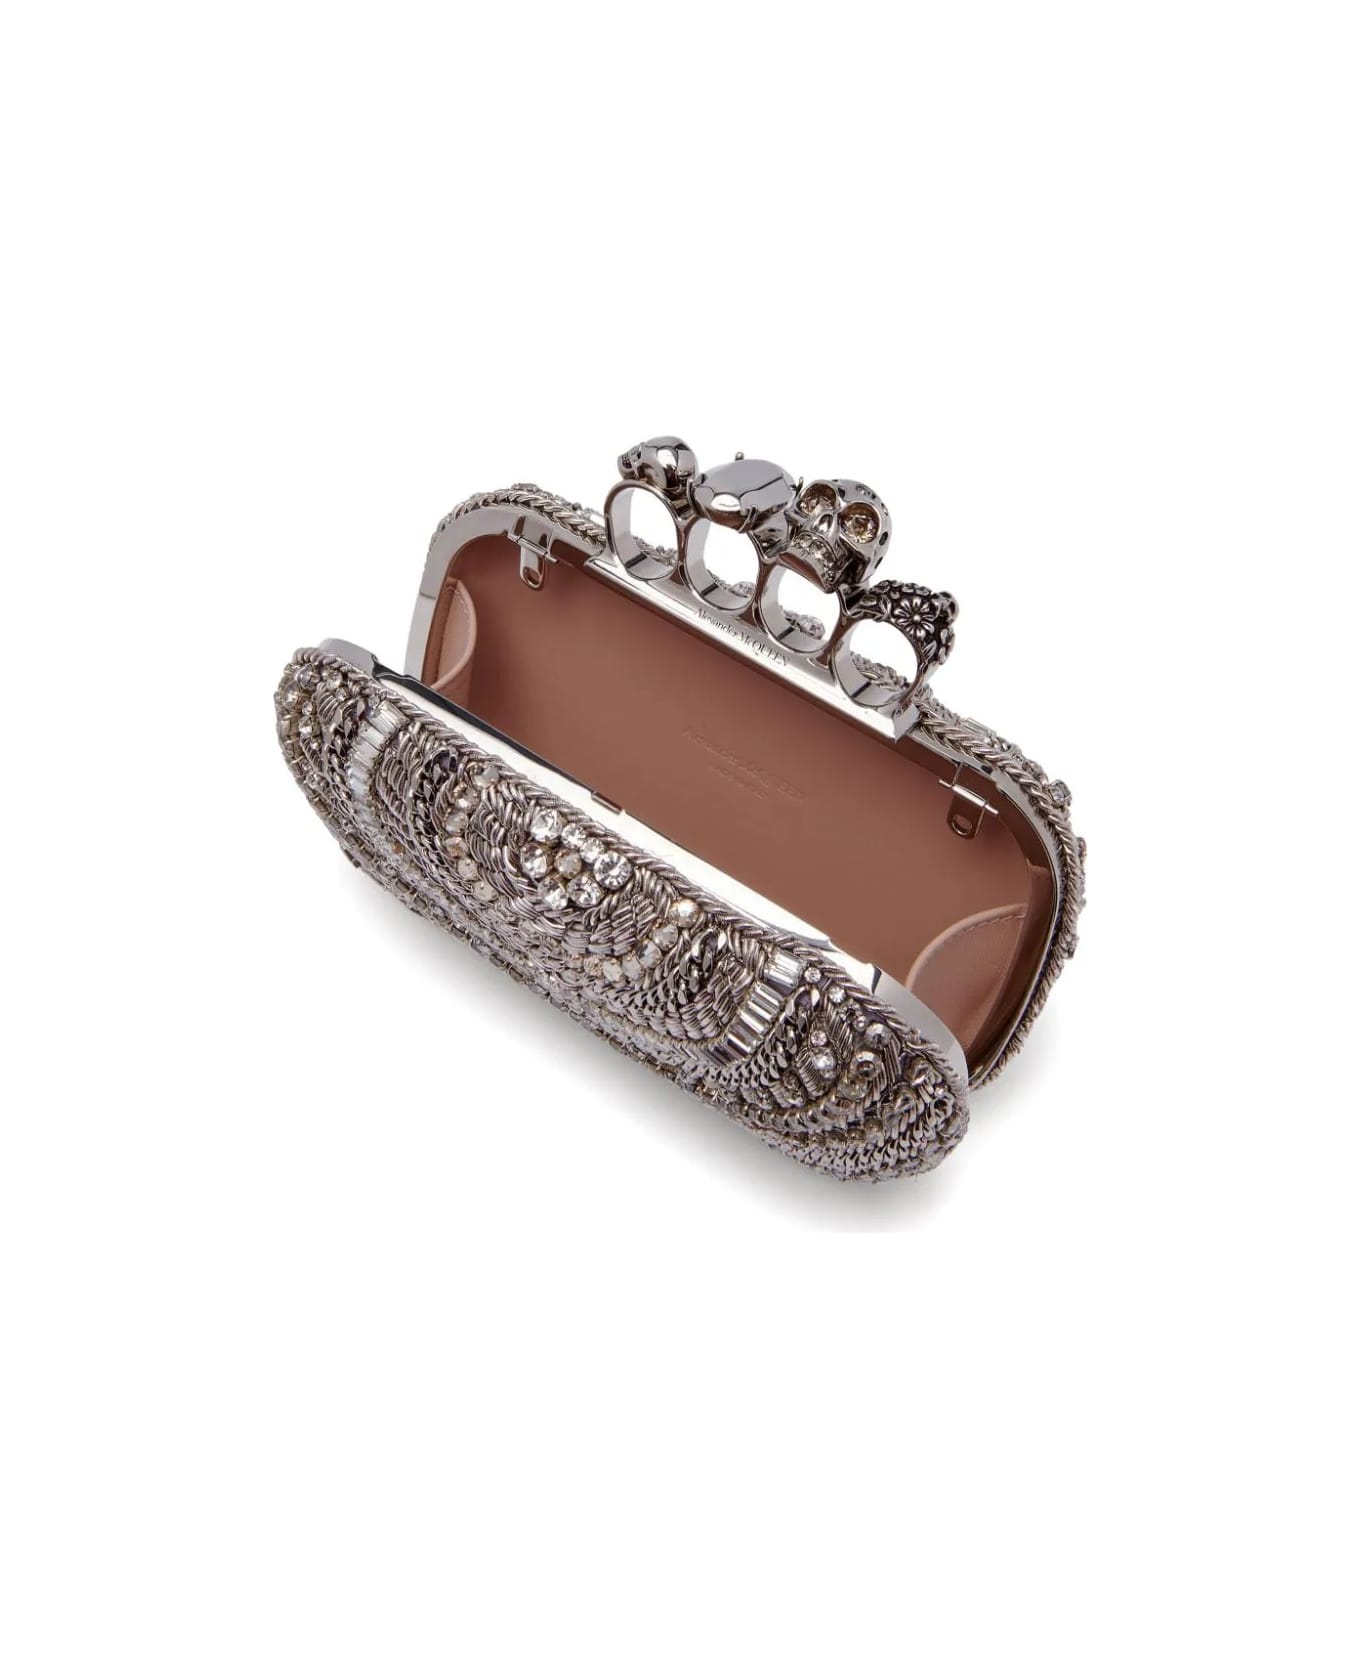 Alexander McQueen The Knuckle Clutch Bag In Silver - Silver クラッチバッグ